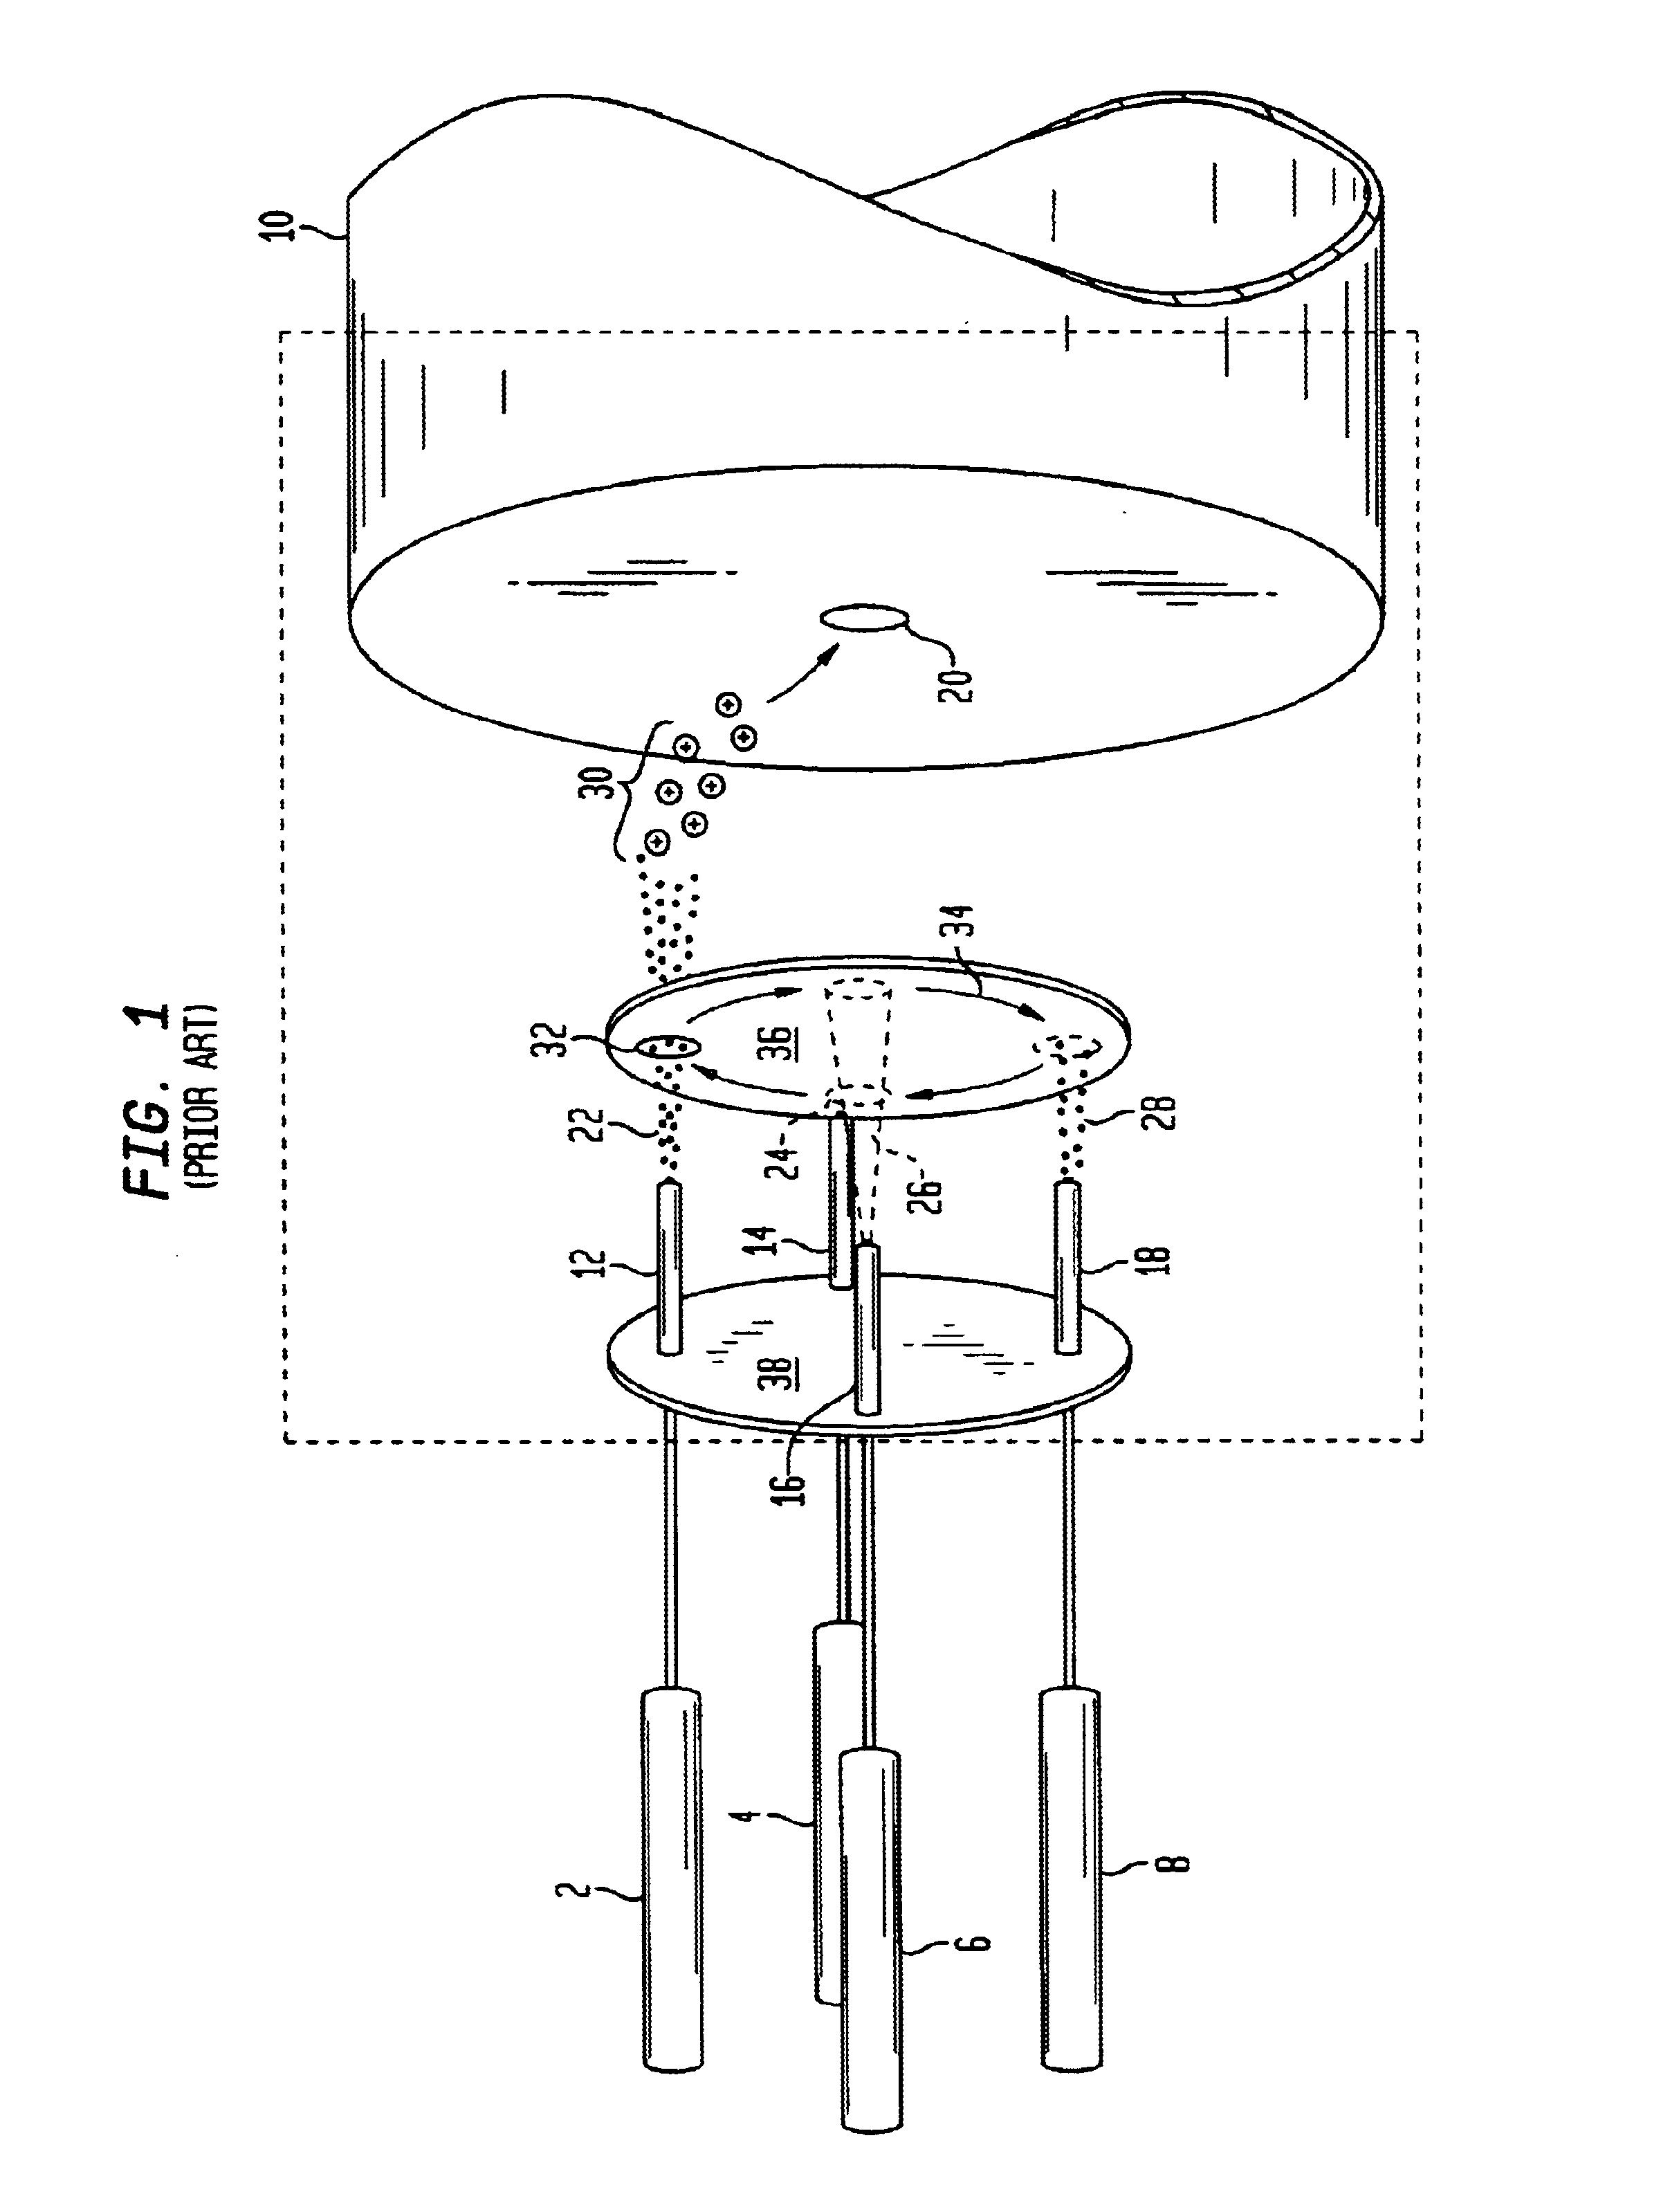 Means and method for multiplexing sprays in an electrospray ionization source